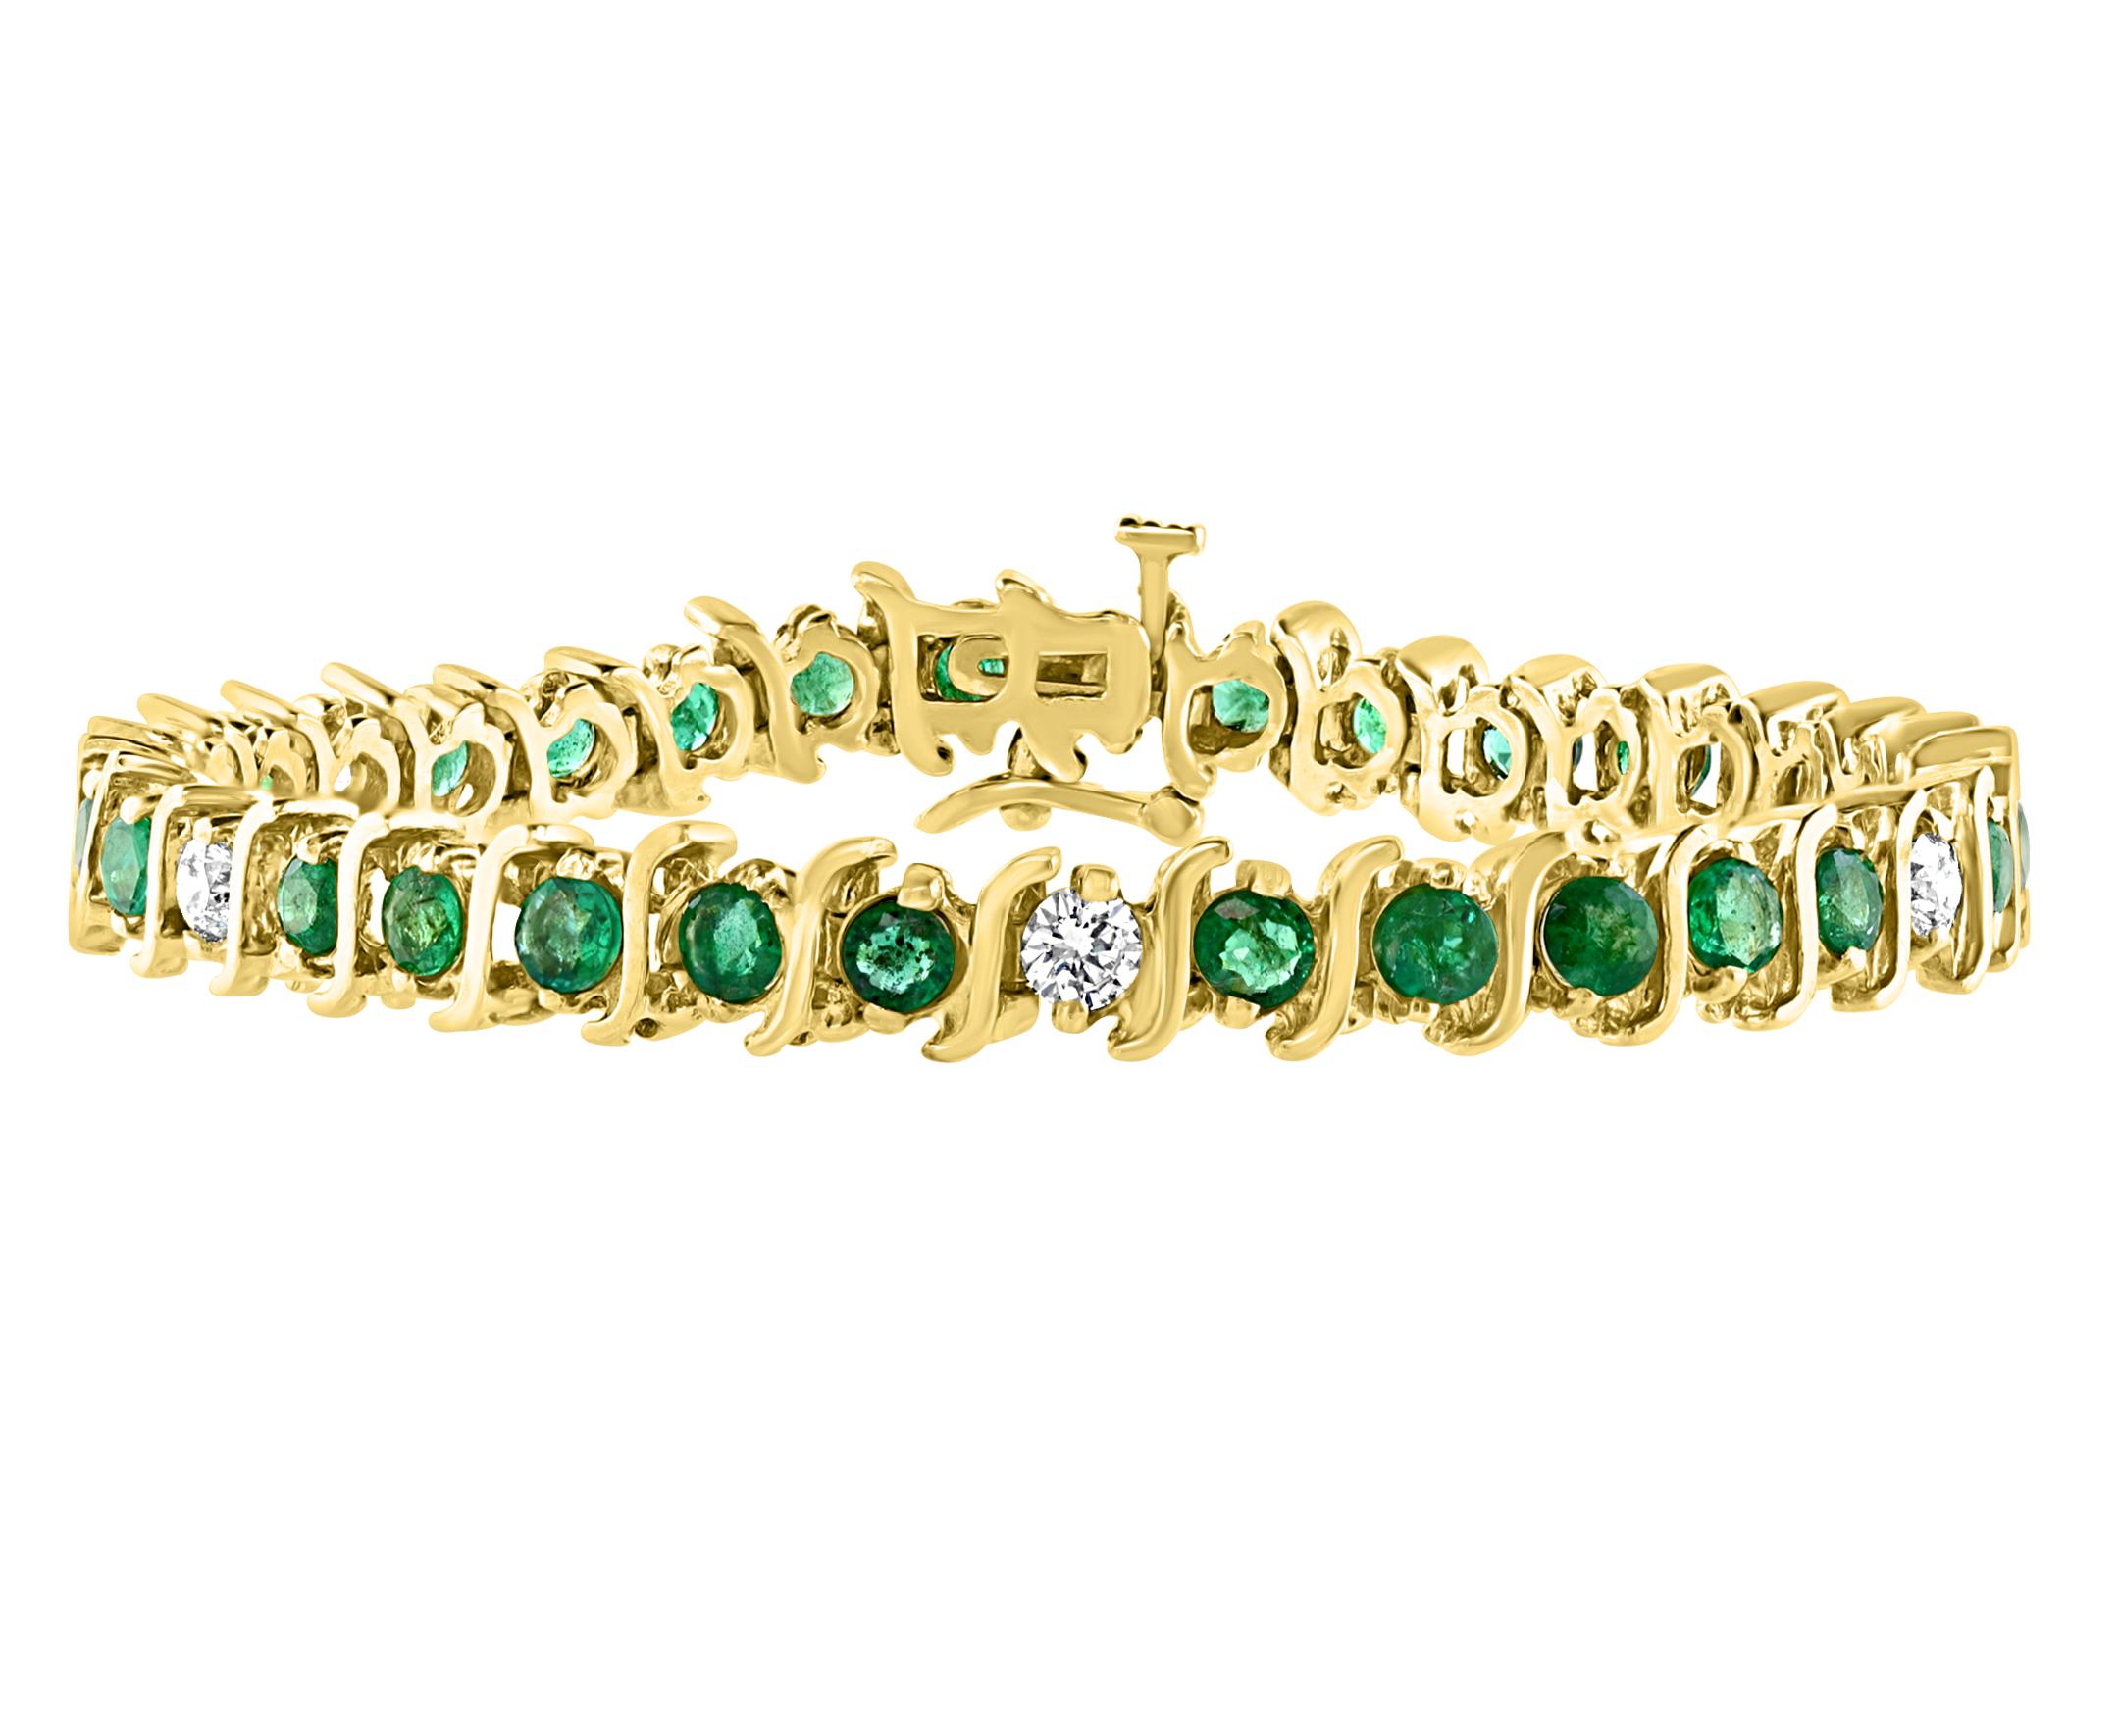 Approximately 6 Carat Emerald And 1.5 Carat  Diamond  Tennis Bracelet 14 Karat Yellow Gold
 Total weight of Emerald is approximately  6.0 carat. Size of emerald is 3.5 MM round roughly 20 pointer each
The bracelet is expertly crafted with 18 grams